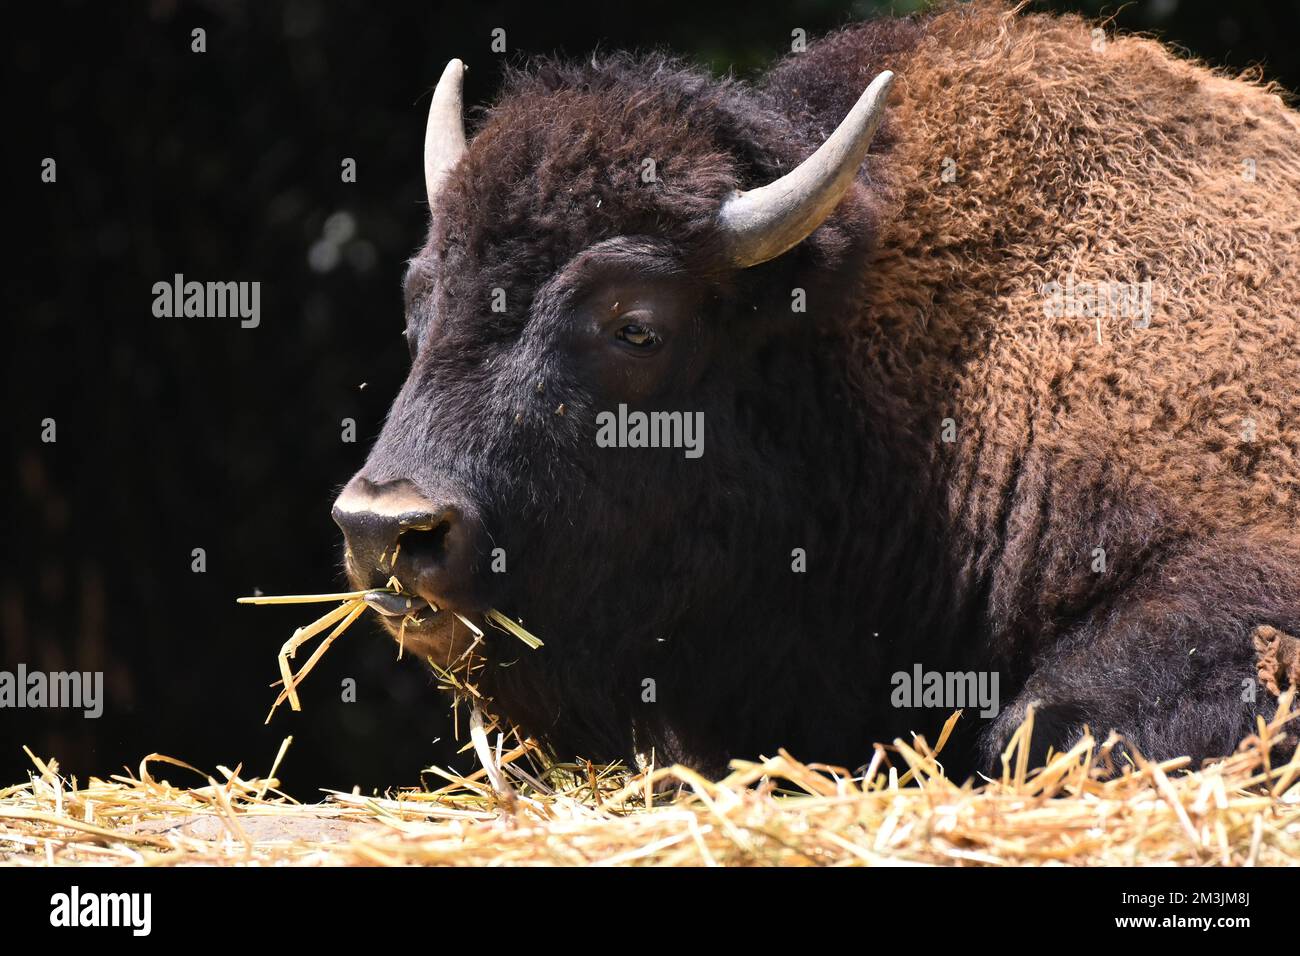 An American Bison species  seen in its habitat during a species conservation program, the zoo has 1803 animals in captivity at Chapultepec Zoo. (Photo Stock Photo